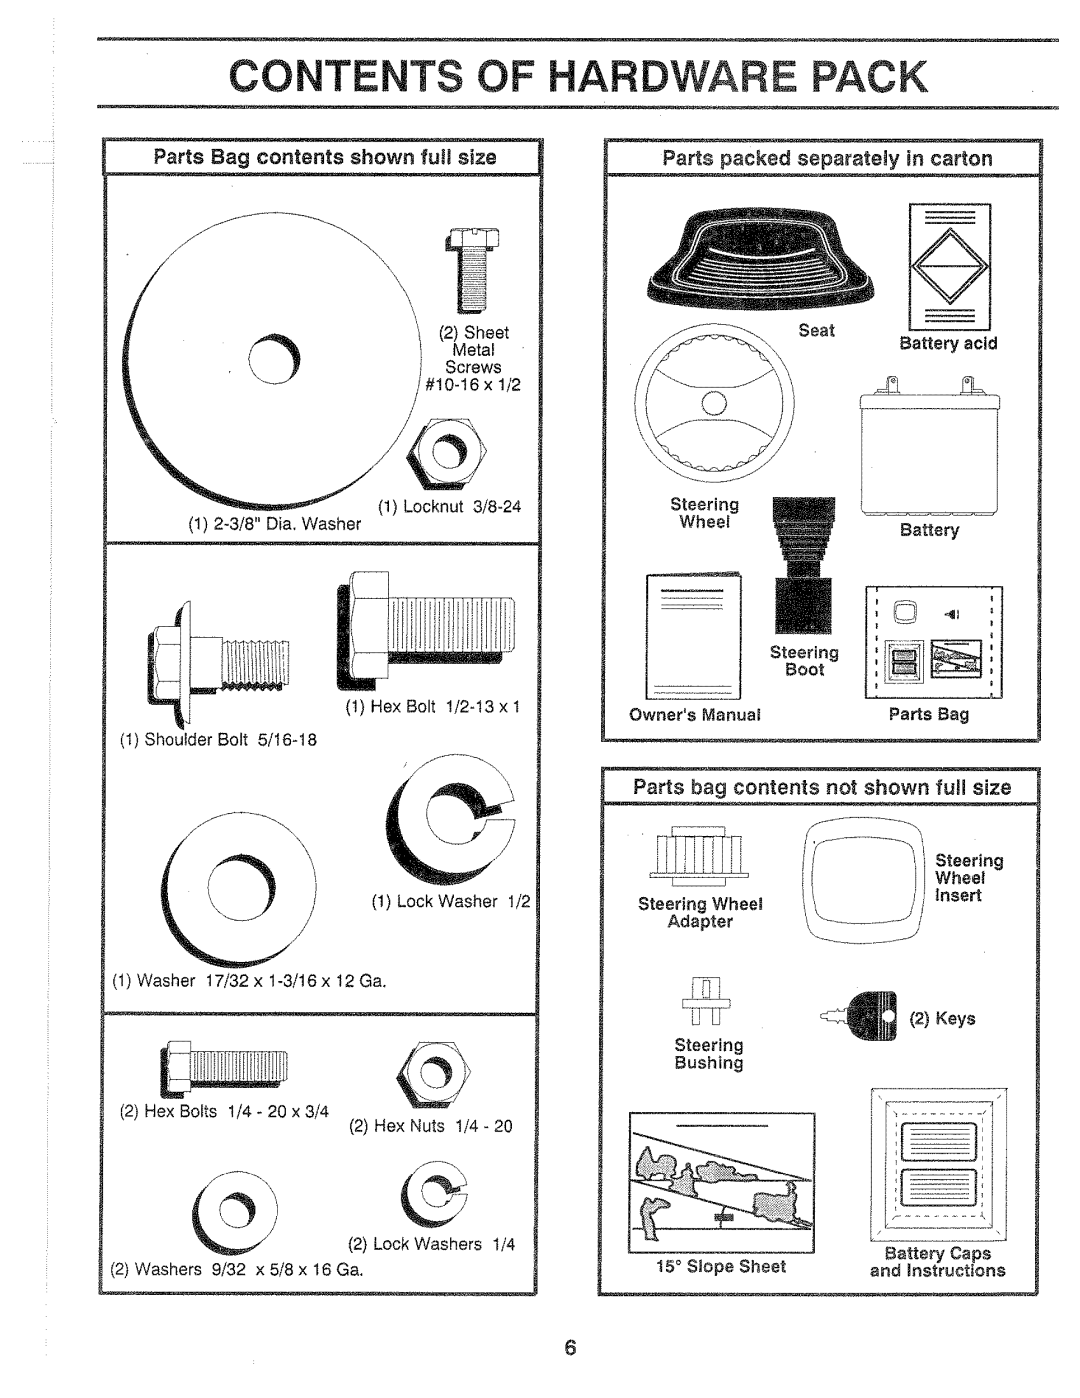 Sears 917.25559 Contents Of Hardwa Pack, Parts Bag contents shown full size, Parts packed separately in carton, Steering 